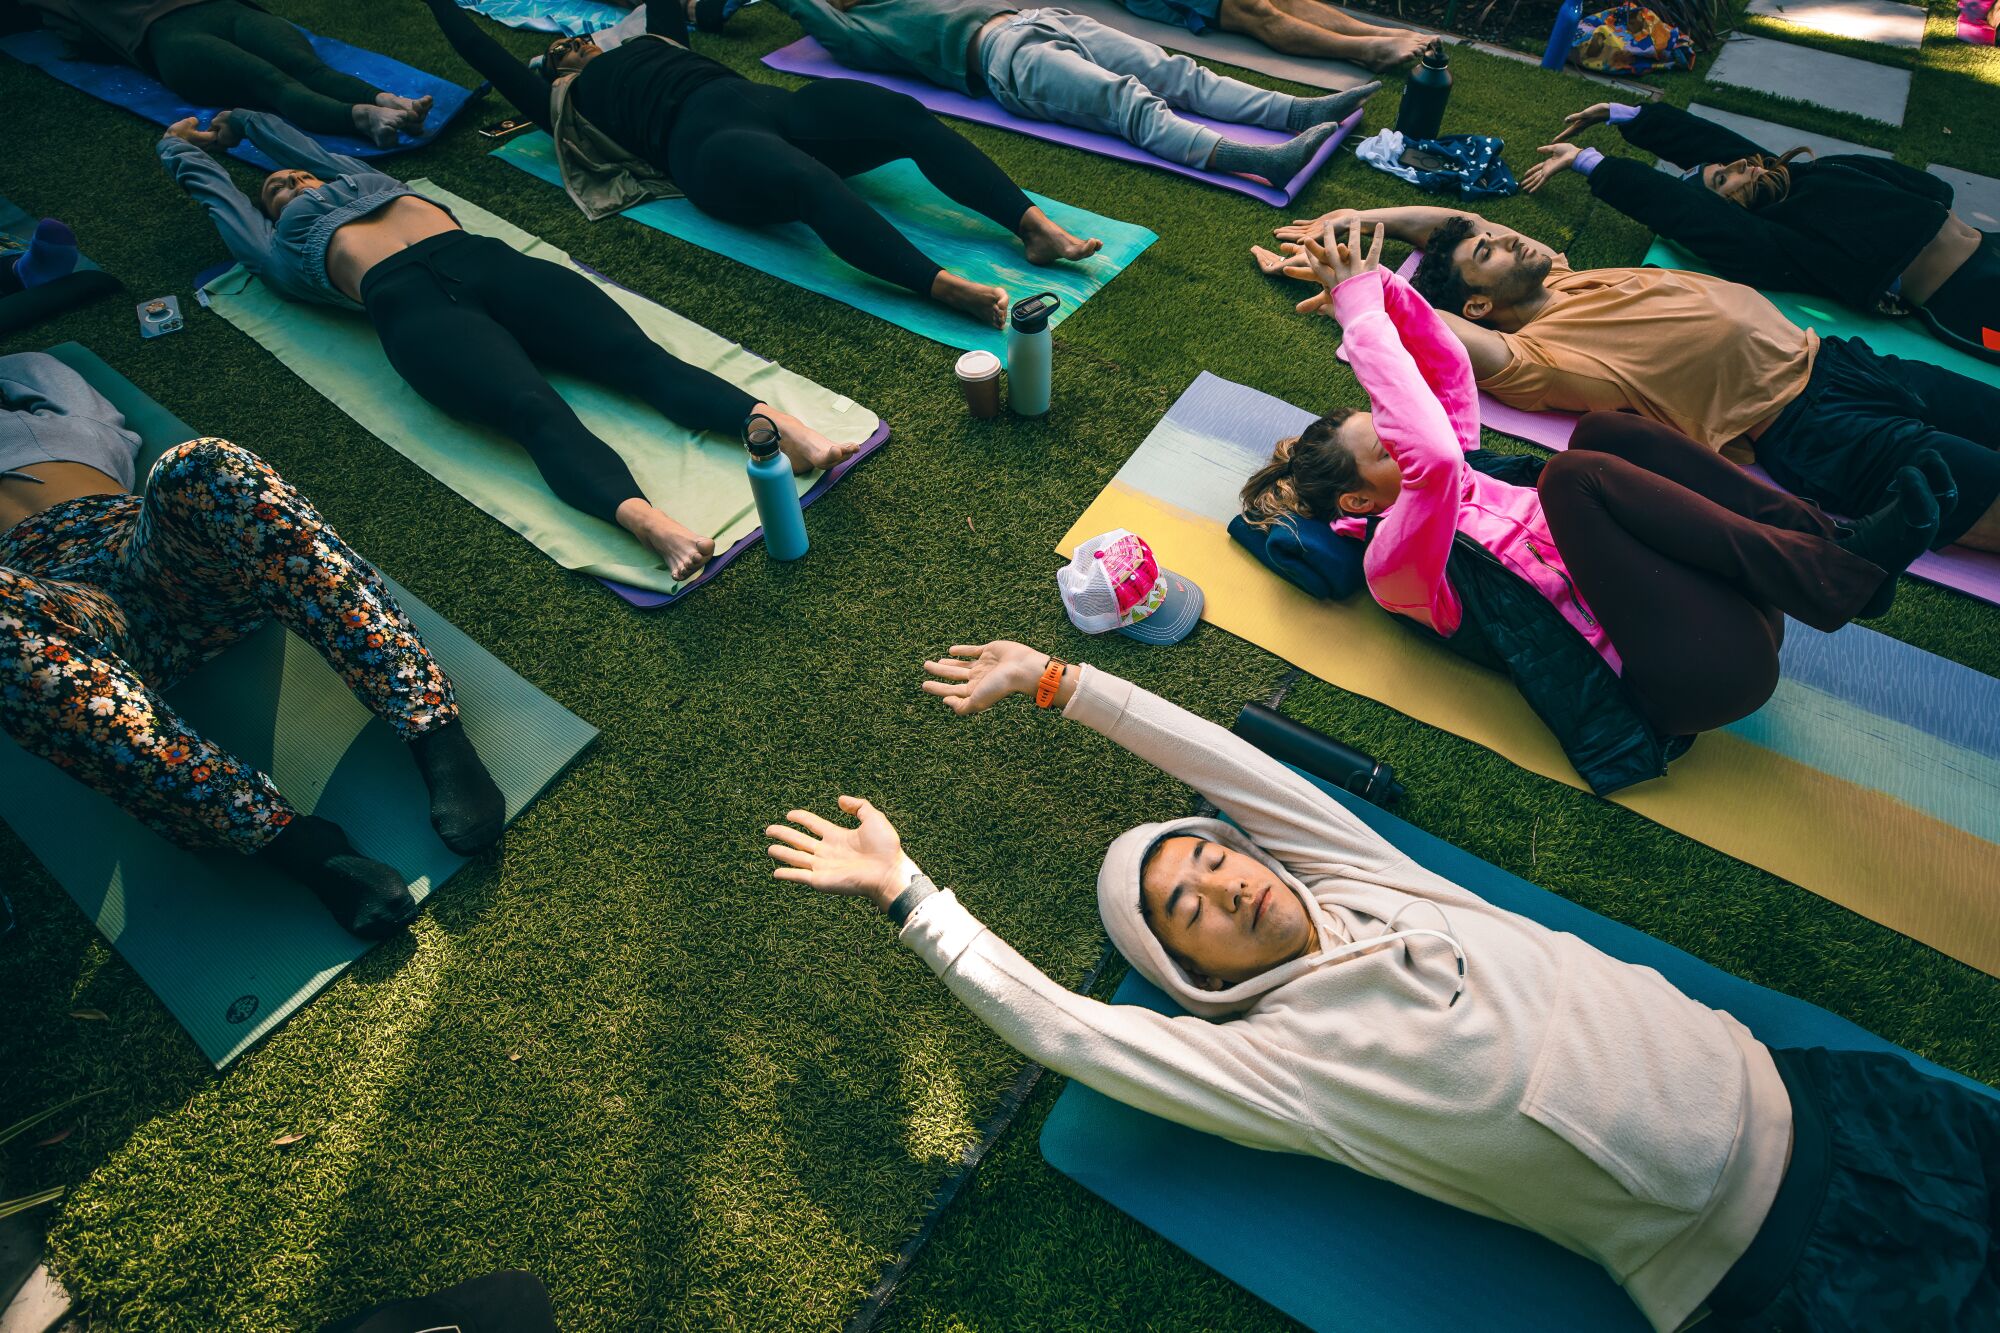 People lie on yoga mats outdoors, stretching